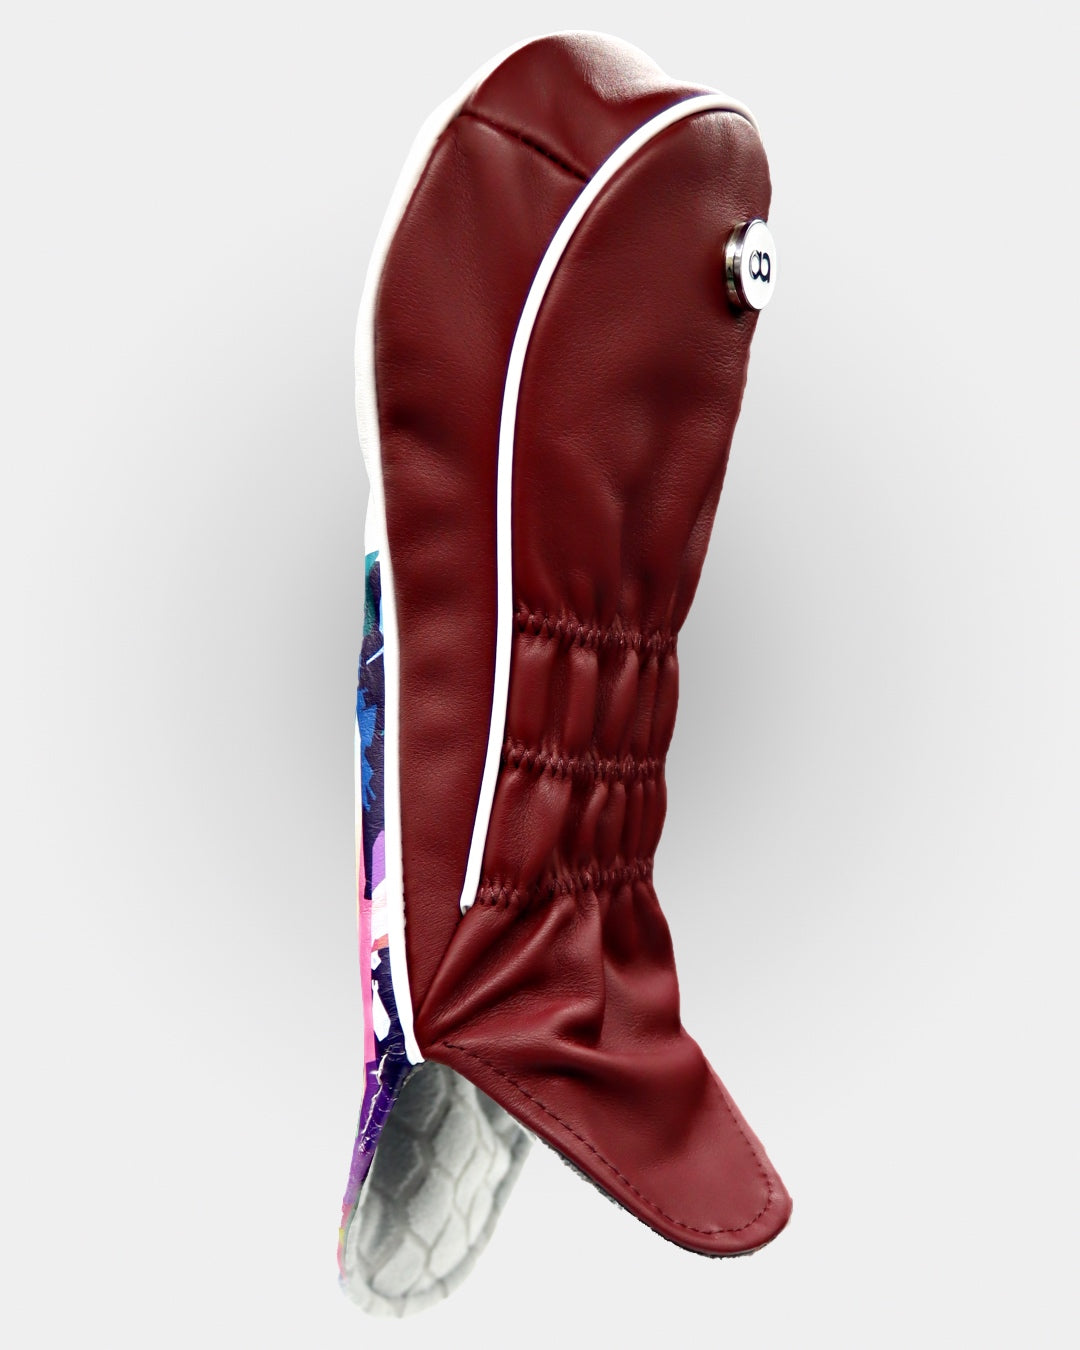 Women's white and burgundy leather headcover by David Alexander. 